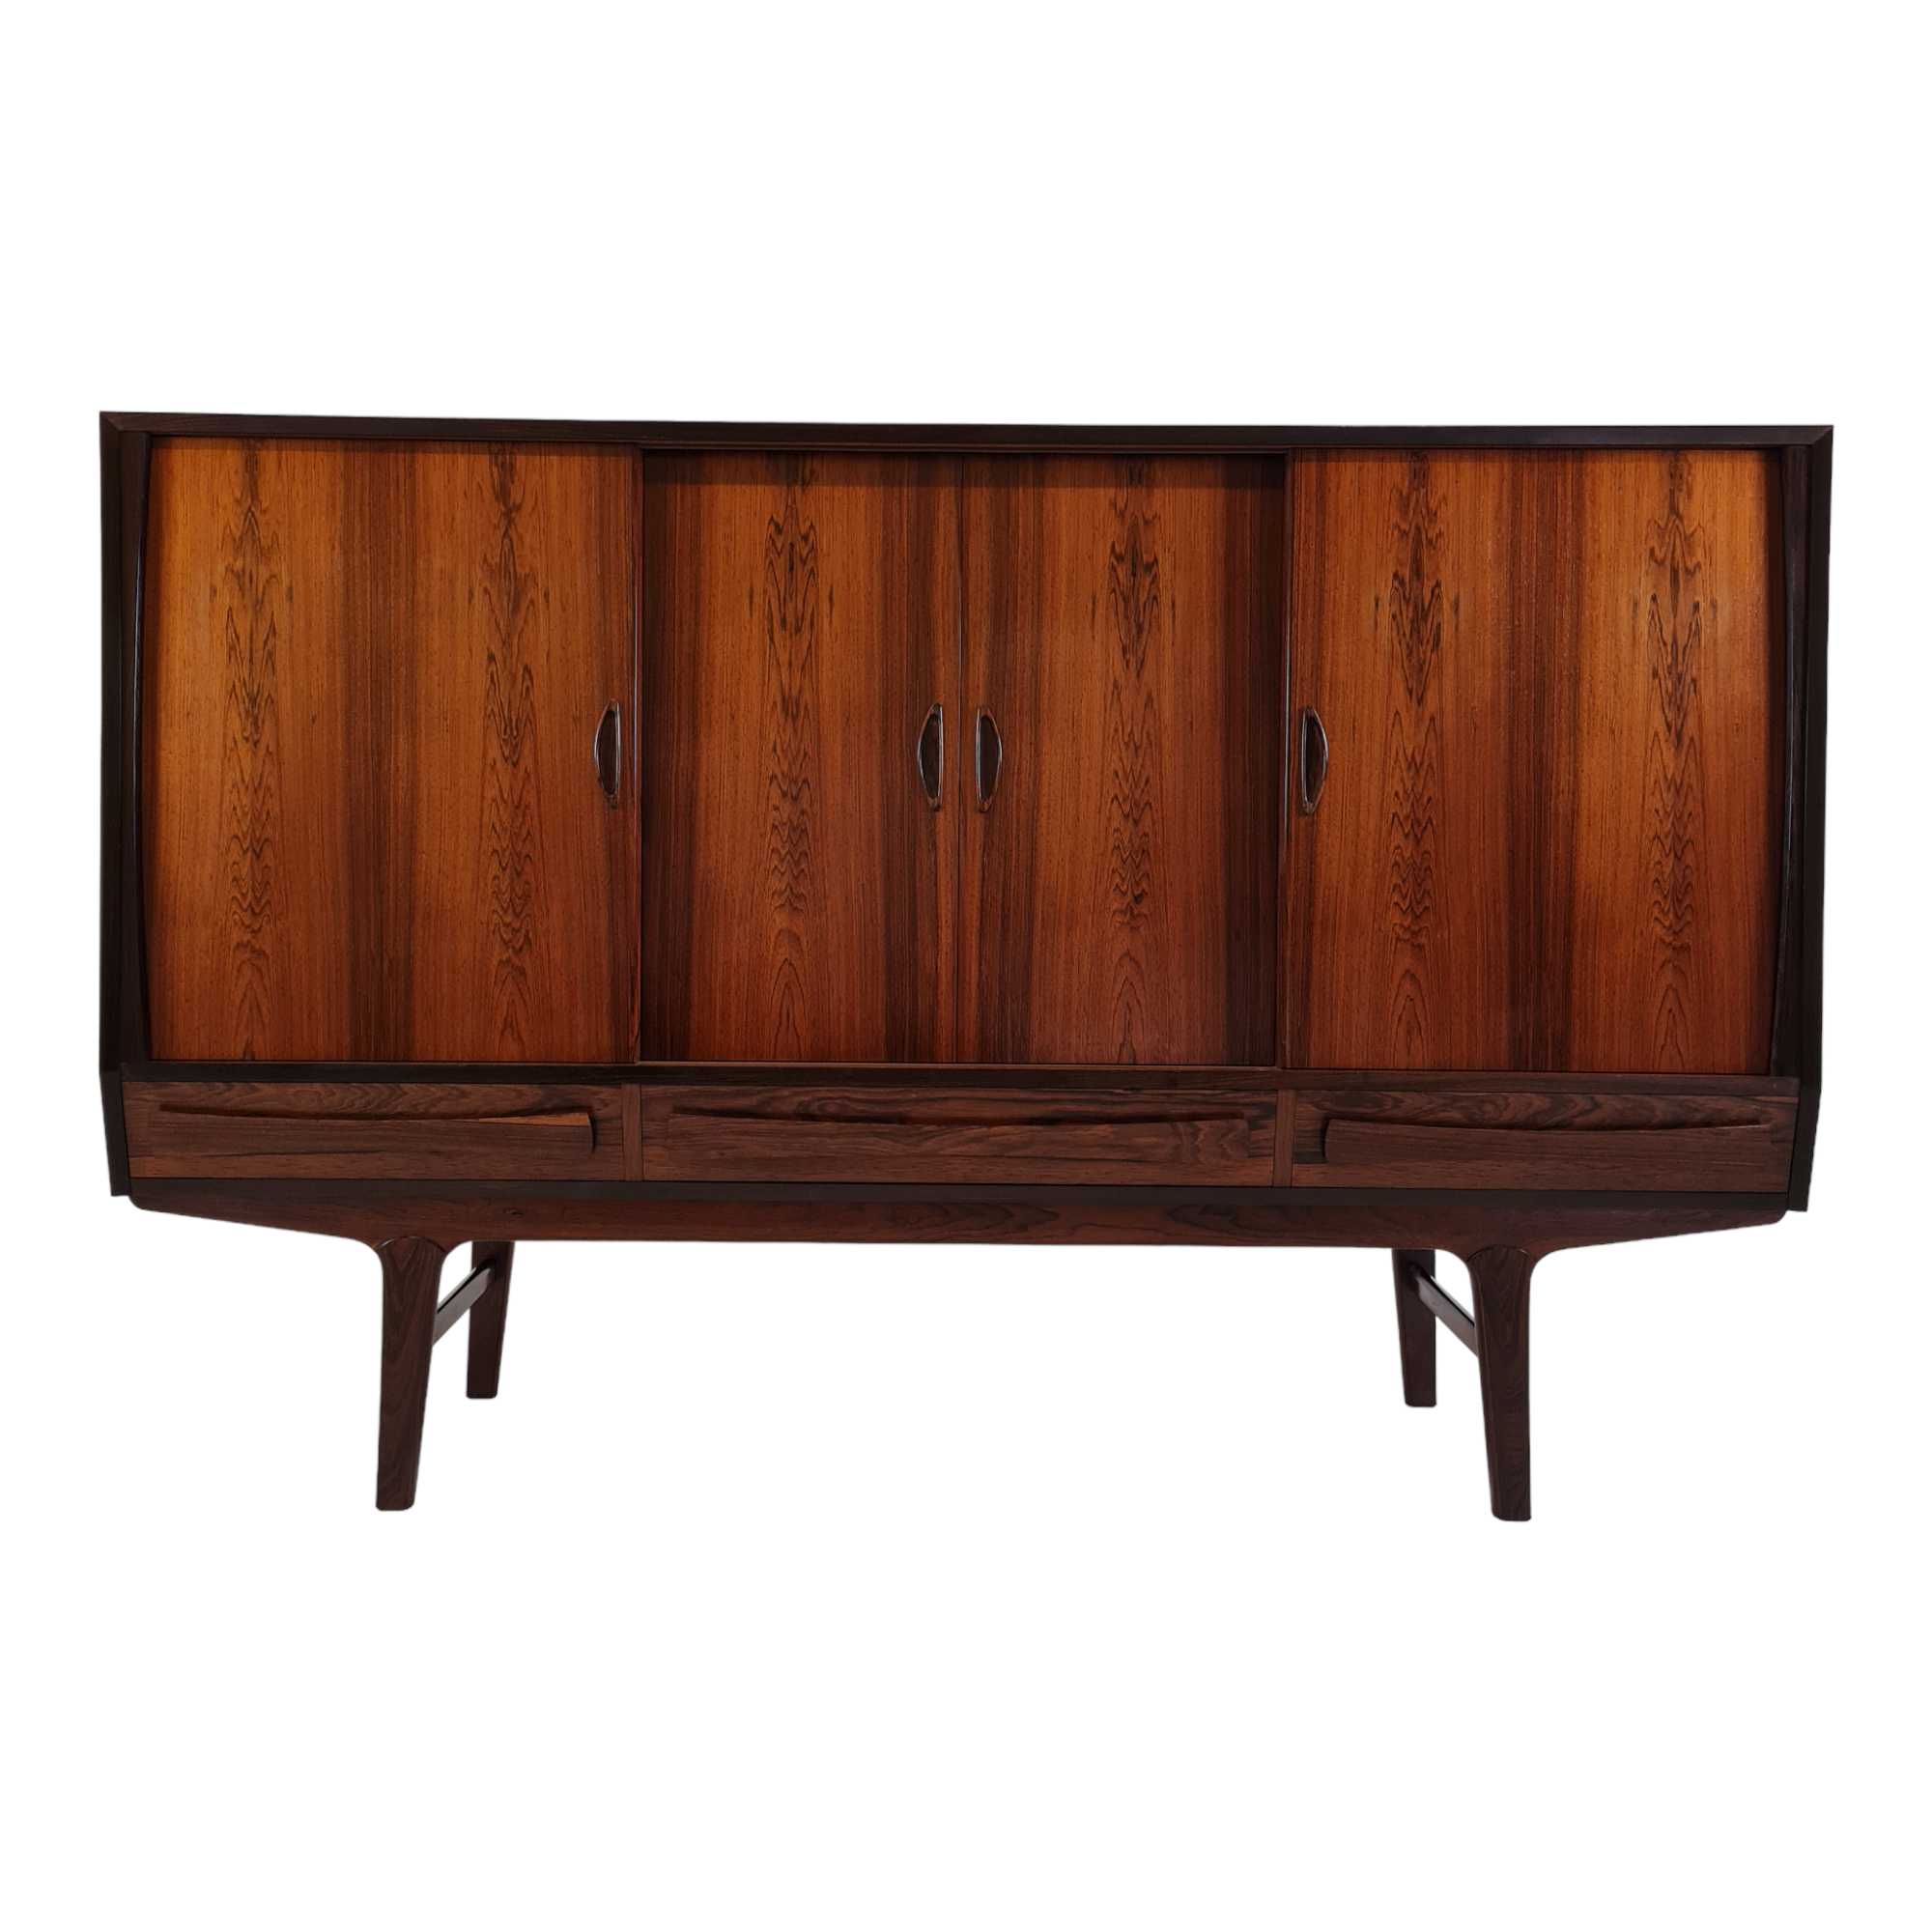 Sideboard with 4 drawers and 4 sliding doors | Børge Seindal | P. Westergaards Furniture | Rosewood